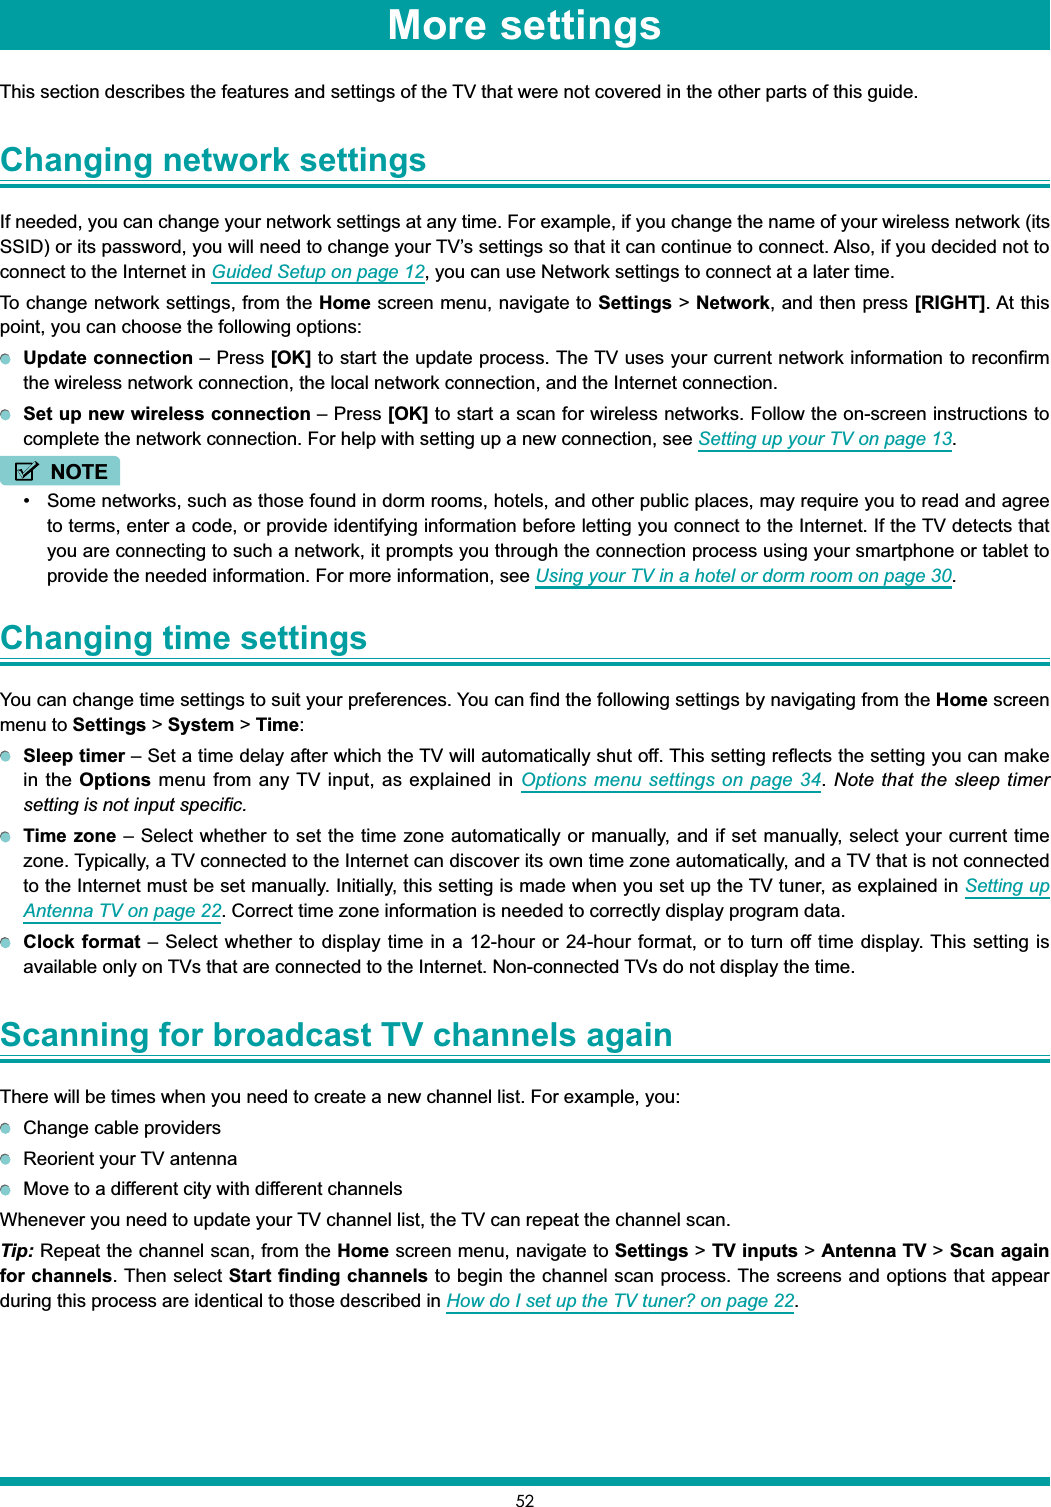 52This section describes the features and settings of the TV that were not covered in the other parts of this guide.Changing network settingsIf needed, you can change your network settings at any time. For example, if you change the name of your wireless network (its SSID) or its password, you will need to change your TV’s settings so that it can continue to connect. Also, if you decided not to connect to the Internet in Guided Setup on page 12, you can use Network settings to connect at a later time.To change network settings, from the Home screen menu, navigate to Settings &gt; Network, and then press [RIGHT]. At this point, you can choose the following options:Update connection – Press [OK] to start the update process. The TV uses your current network information to reconfirm the wireless network connection, the local network connection, and the Internet connection.Set up new wireless connection – Press [OK] to start a scan for wireless networks. Follow the on-screen instructions to complete the network connection. For help with setting up a new connection, see Setting up your TV on page 13.NOTE Some networks, such as those found in dorm rooms, hotels, and other public places, may require you to read and agree to terms, enter a code, or provide identifying information before letting you connect to the Internet. If the TV detects that you are connecting to such a network, it prompts you through the connection process using your smartphone or tablet to provide the needed information. For more information, see Using your TV in a hotel or dorm room on page 30.Changing time settingsYou can change time settings to suit your preferences. You can find the following settings by navigating from the Home screen menu to Settings &gt; System &gt; Time:Sleep timer – Set a time delay after which the TV will automatically shut off. This setting reflects the setting you can make in the Options menu from any TV input, as explained in Options menu settings on page 34.Note that the sleep timer setting is not input specific.Time zone – Select whether to set the time zone automatically or manually, and if set manually, select your current time zone. Typically, a TV connected to the Internet can discover its own time zone automatically, and a TV that is not connected to the Internet must be set manually. Initially, this setting is made when you set up the TV tuner, as explained in Setting up Antenna TV on page 22. Correct time zone information is needed to correctly display program data.Clock format – Select whether to display time in a 12-hour or 24-hour format, or to turn off time display. This setting is available only on TVs that are connected to the Internet. Non-connected TVs do not display the time.Scanning for broadcast TV channels againThere will be times when you need to create a new channel list. For example, you:Change cable providersReorient your TV antennaMove to a different city with different channelsWhenever you need to update your TV channel list, the TV can repeat the channel scan.Tip: Repeat the channel scan, from the Home screen menu, navigate to Settings &gt; TV inputs &gt; Antenna TV &gt; Scan again for channels. Then select Start finding channels to begin the channel scan process. The screens and options that appear during this process are identical to those described in How do I set up the TV tuner? on page 22.More settings